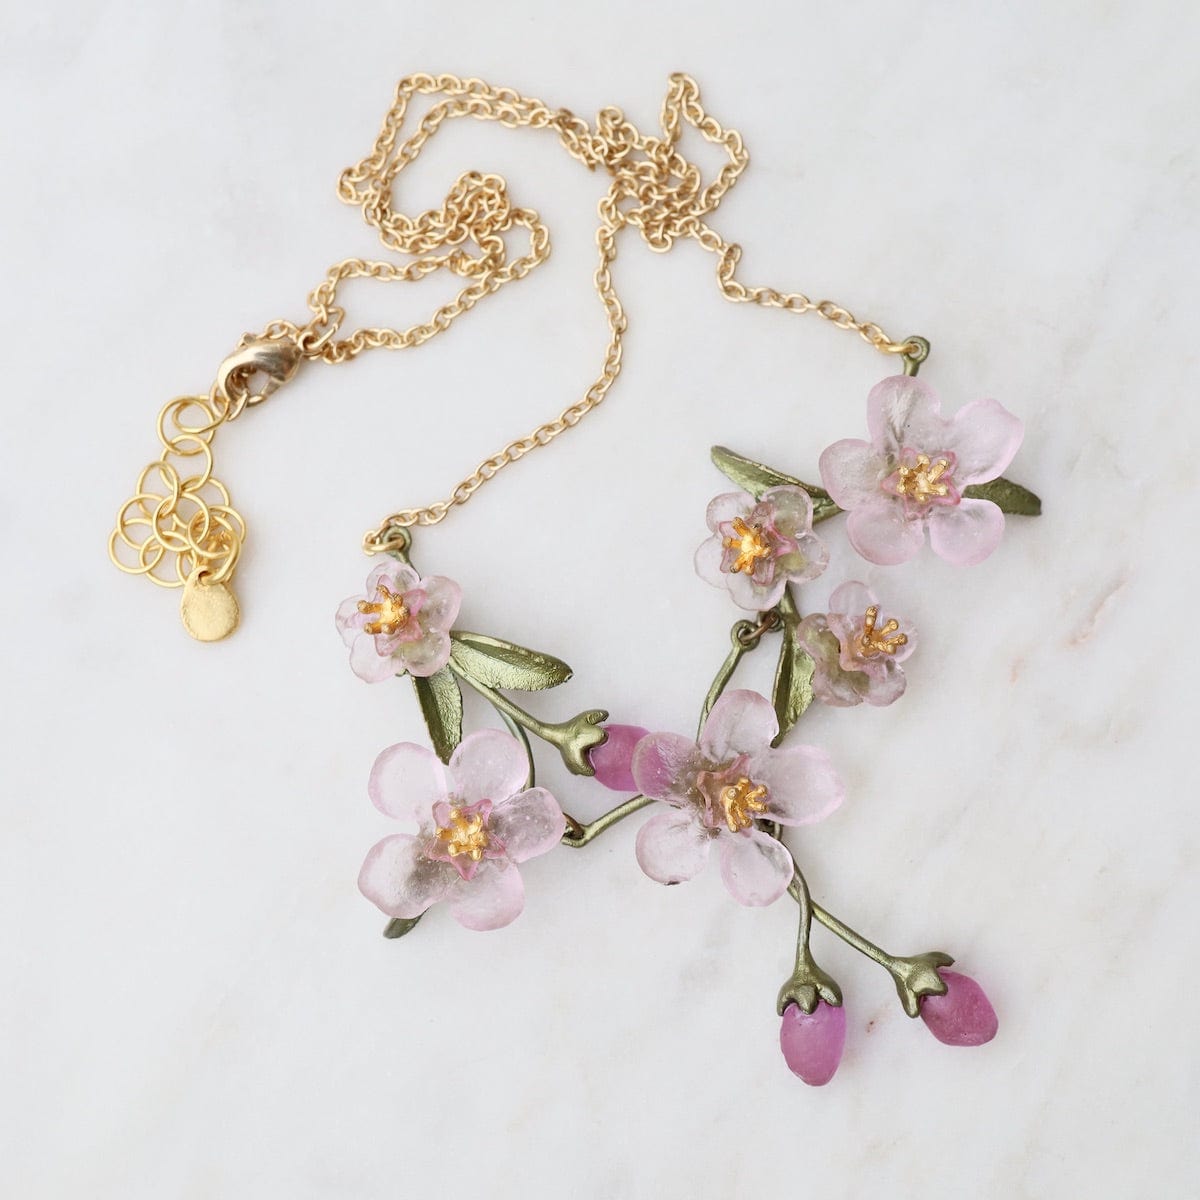 NKL Peach Blossom Statement Necklace